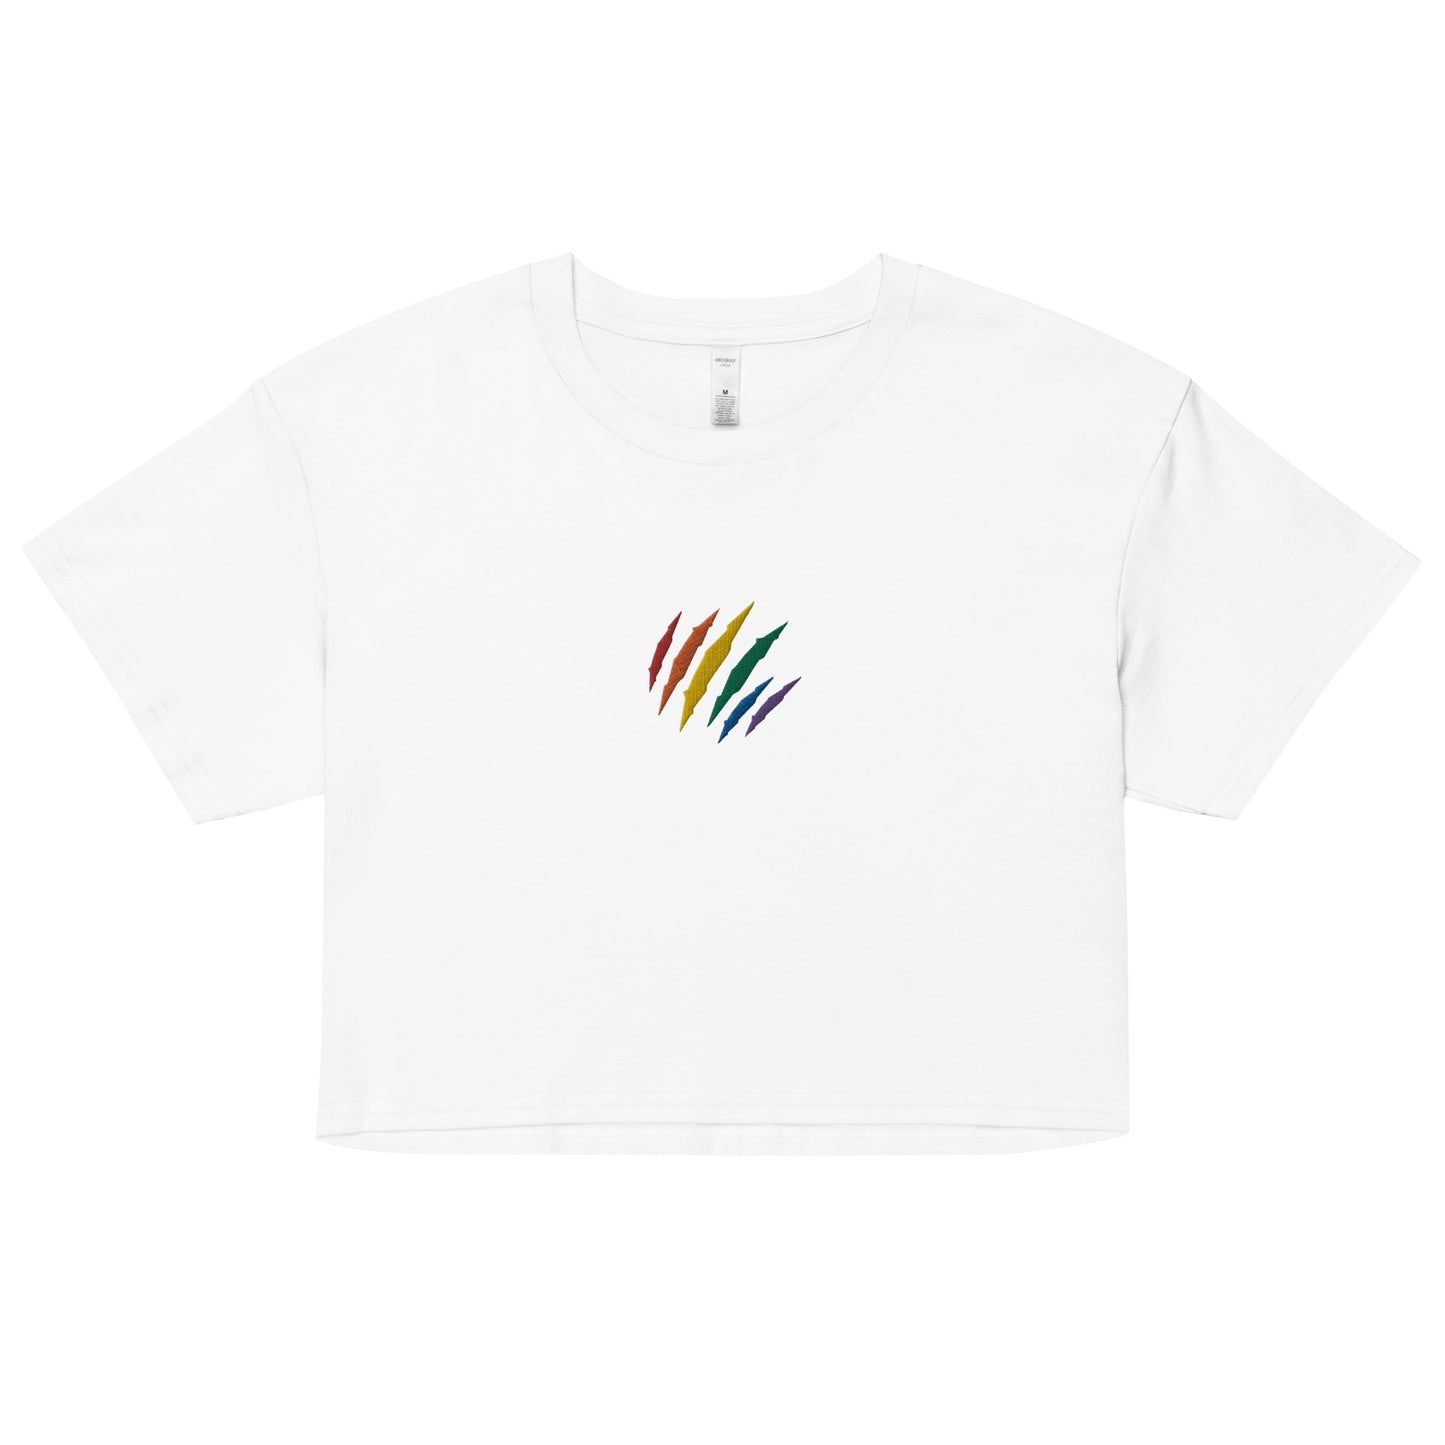 A relaxed, modest white crop top features a subtle rainbow mark embroidery. Adding a touch of rainbow to your look—a playful celebration of lgbtq culture! Made from 100% combed cotton. Available in Extra Small, Small, Medium, Large, Extra Large.